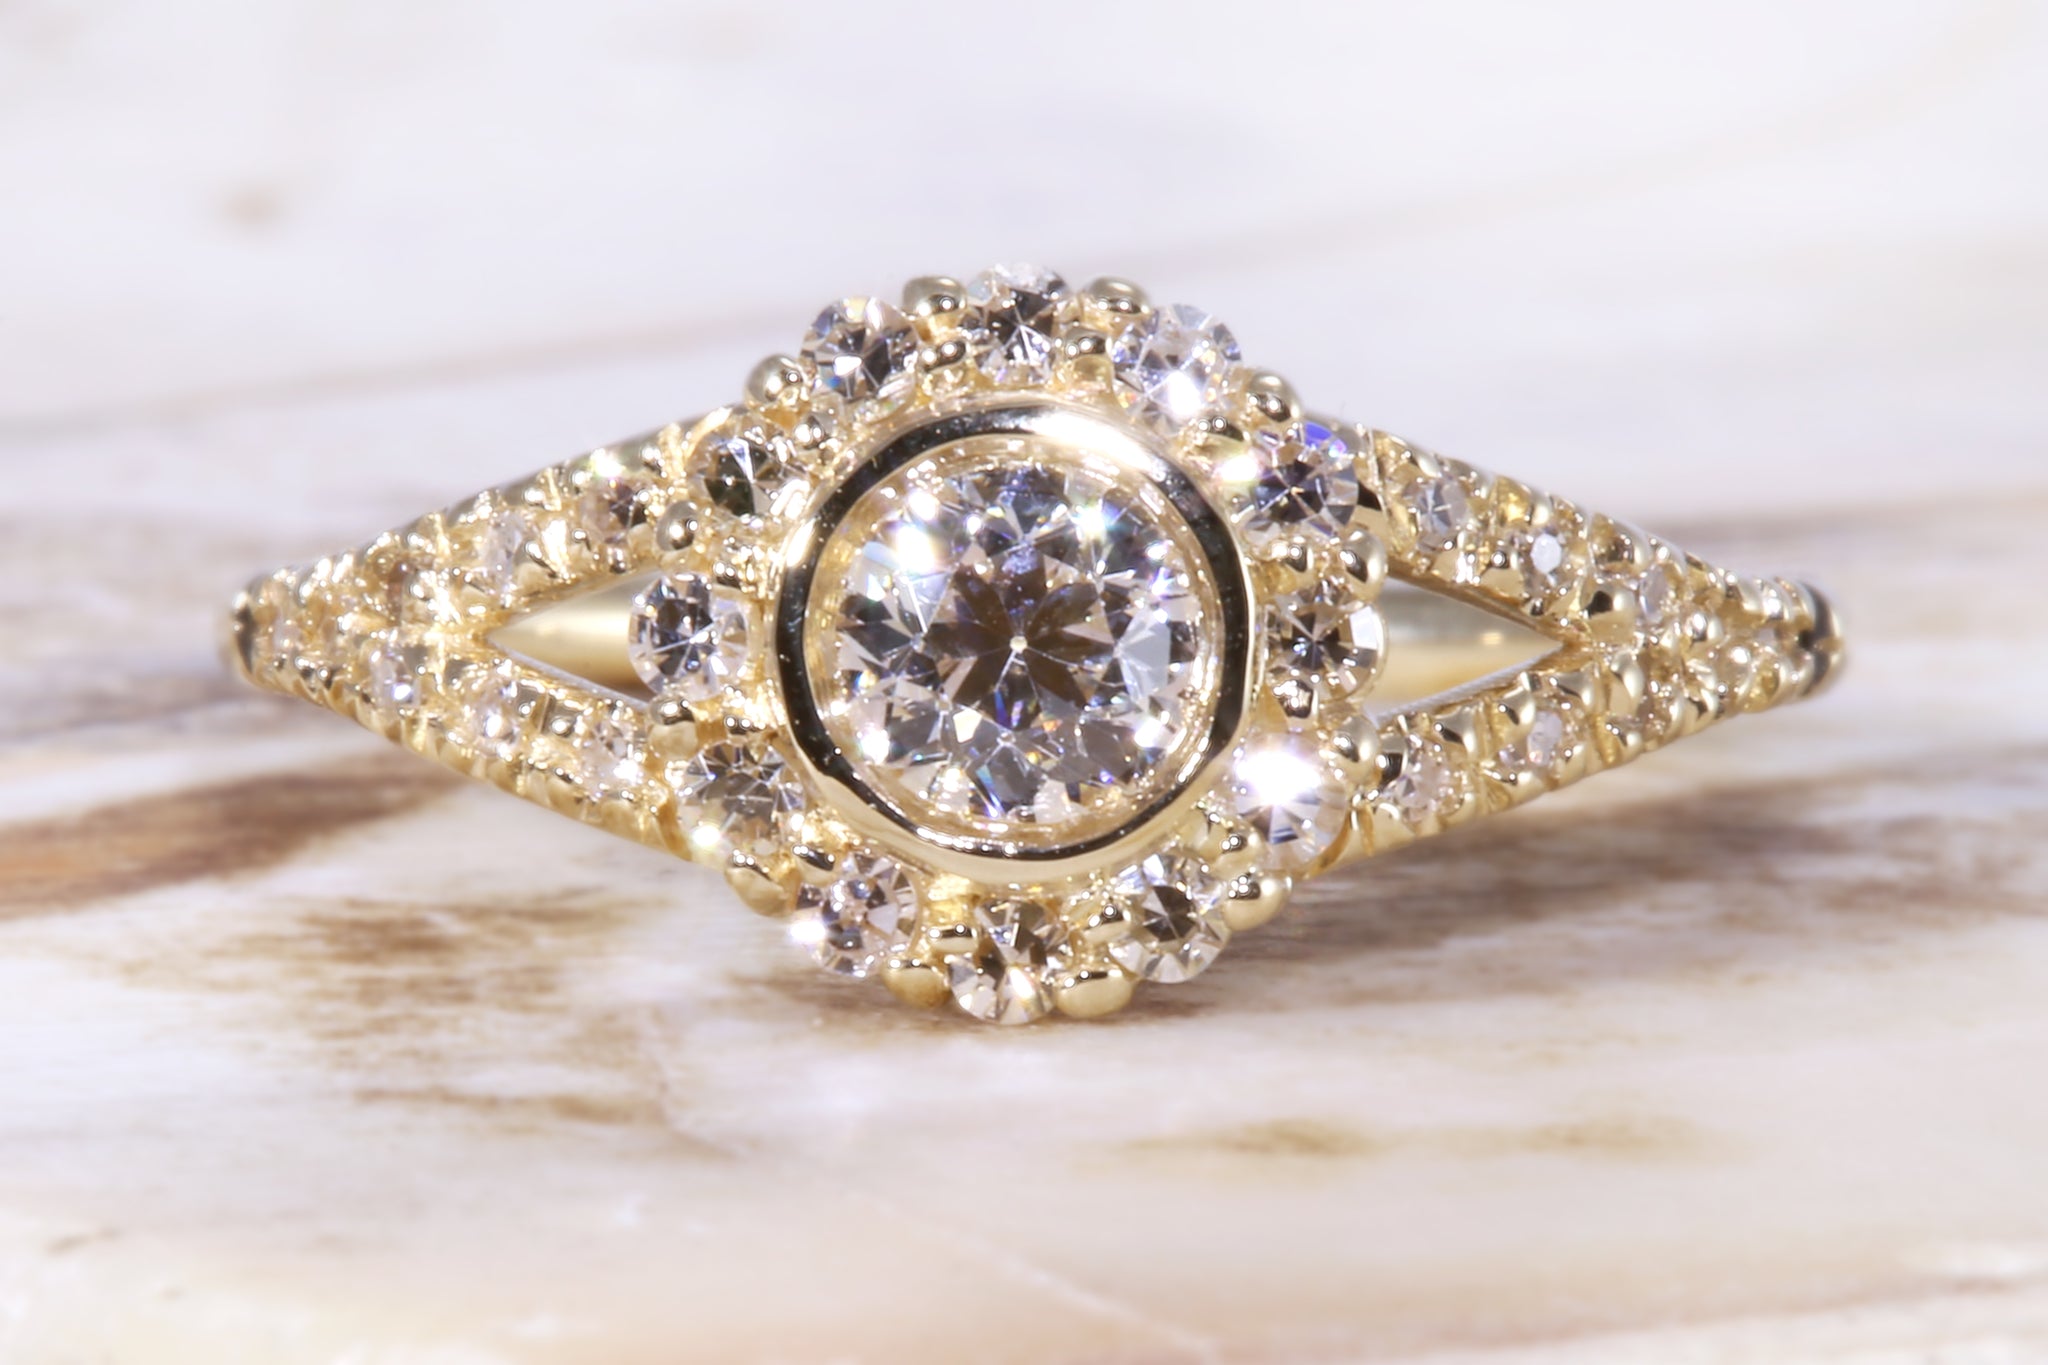 Low Profile Antique Diamond Ring - S. Kind & Co